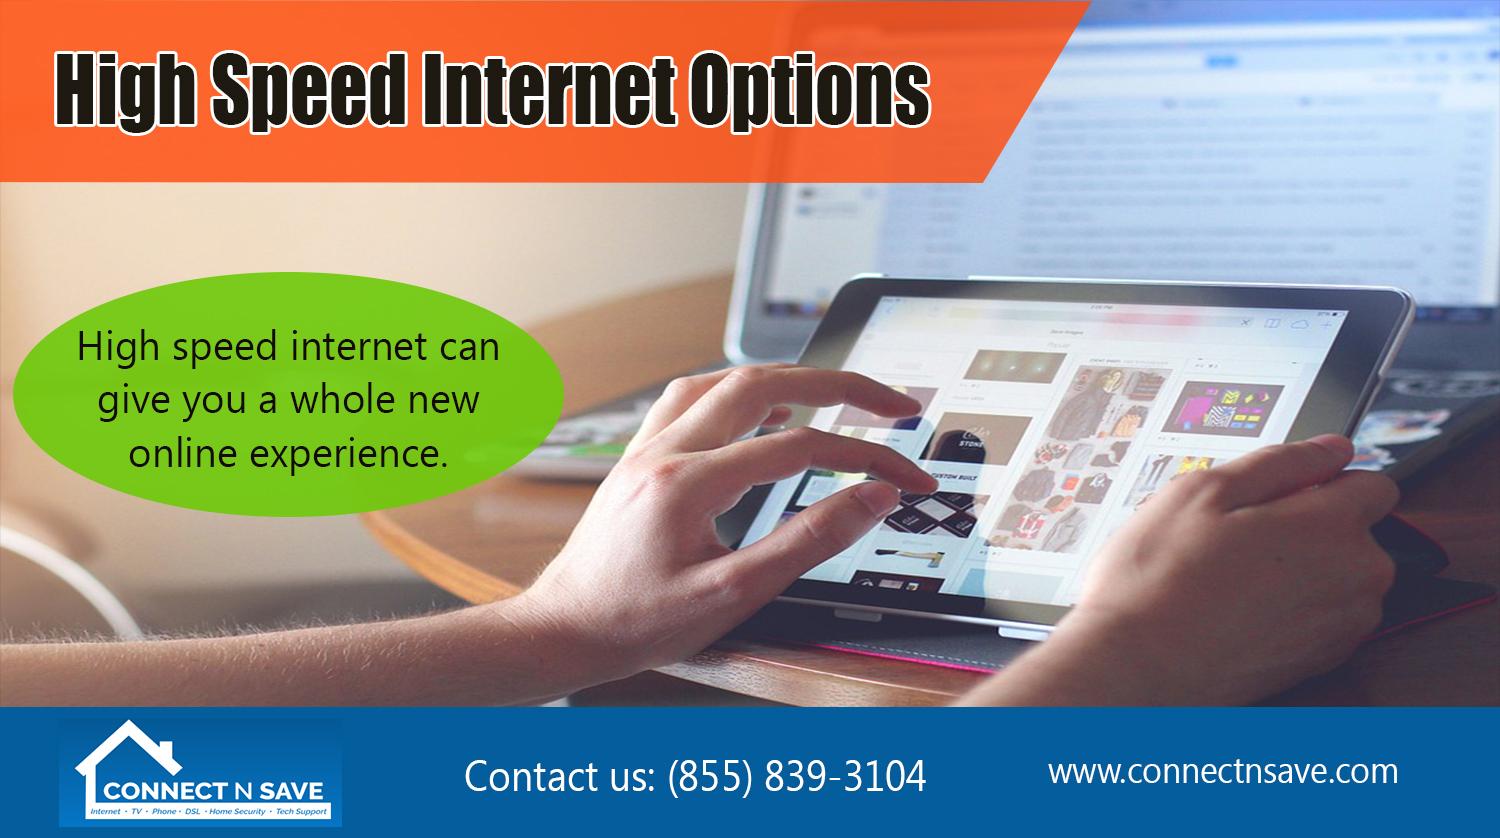 High Speed Internet Options (2) | http://connectnsave.com/